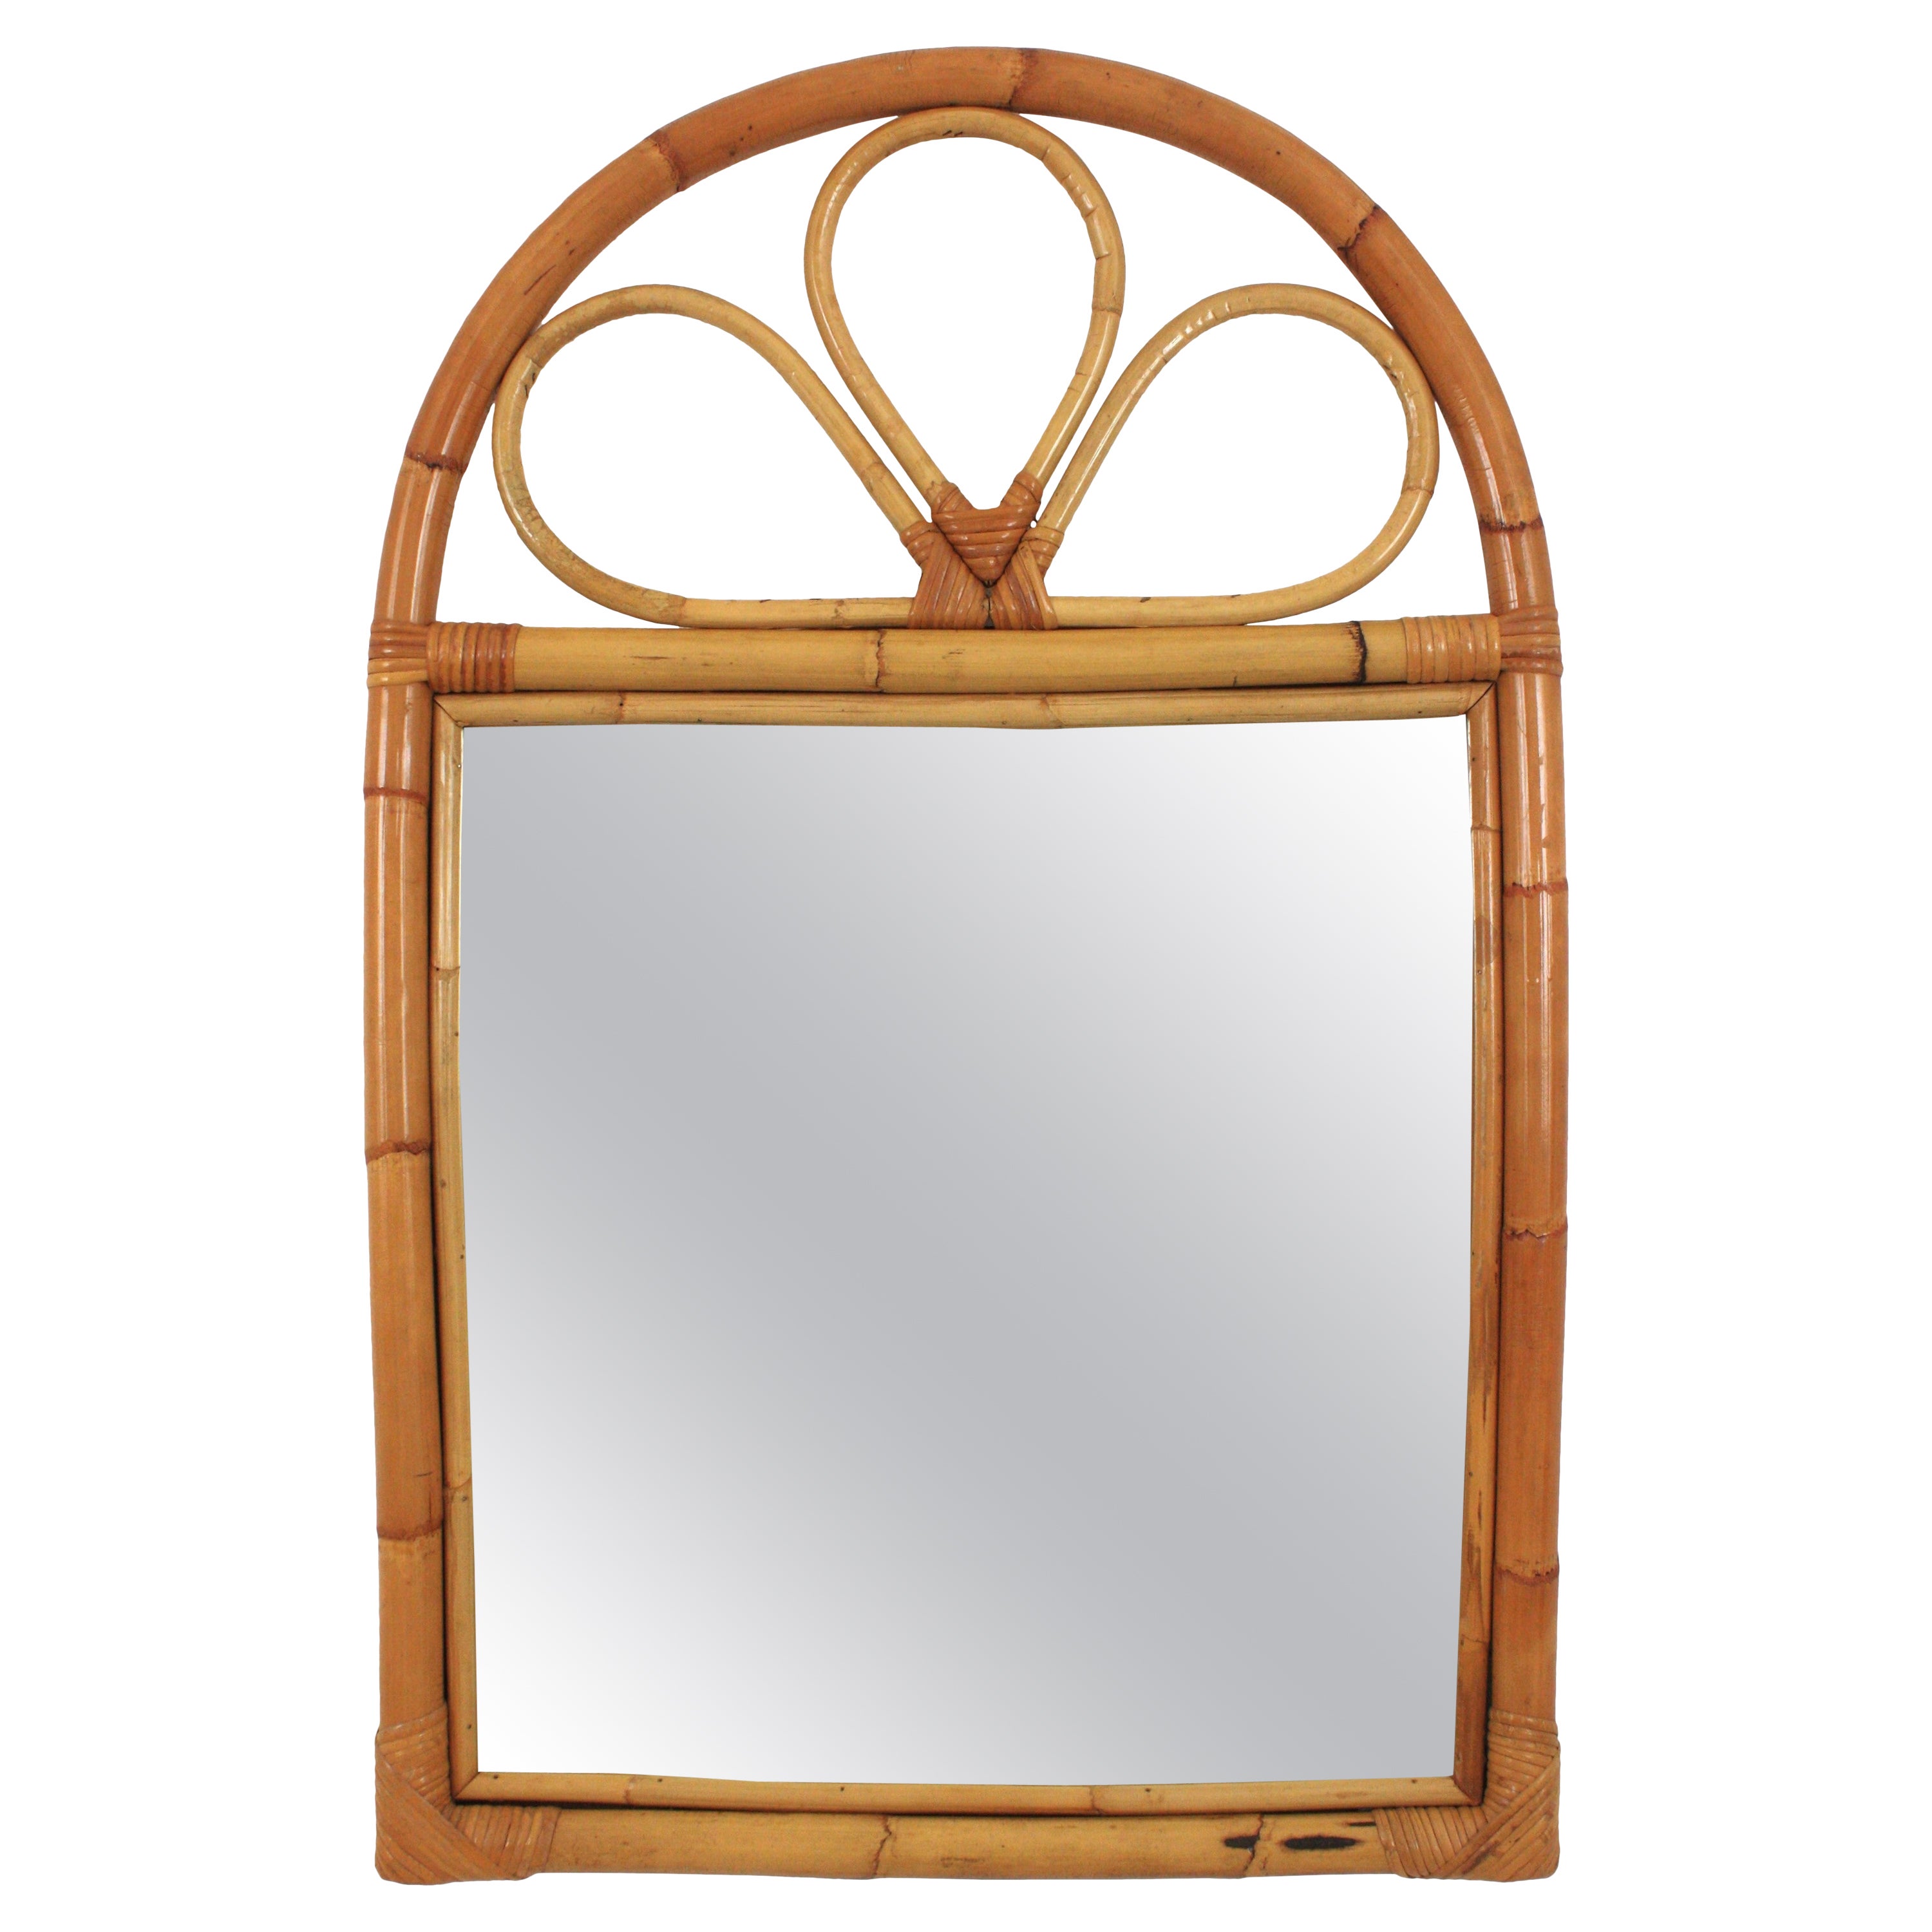 Spanish Rattan Bamboo Mirror with Arched Top, 1960s